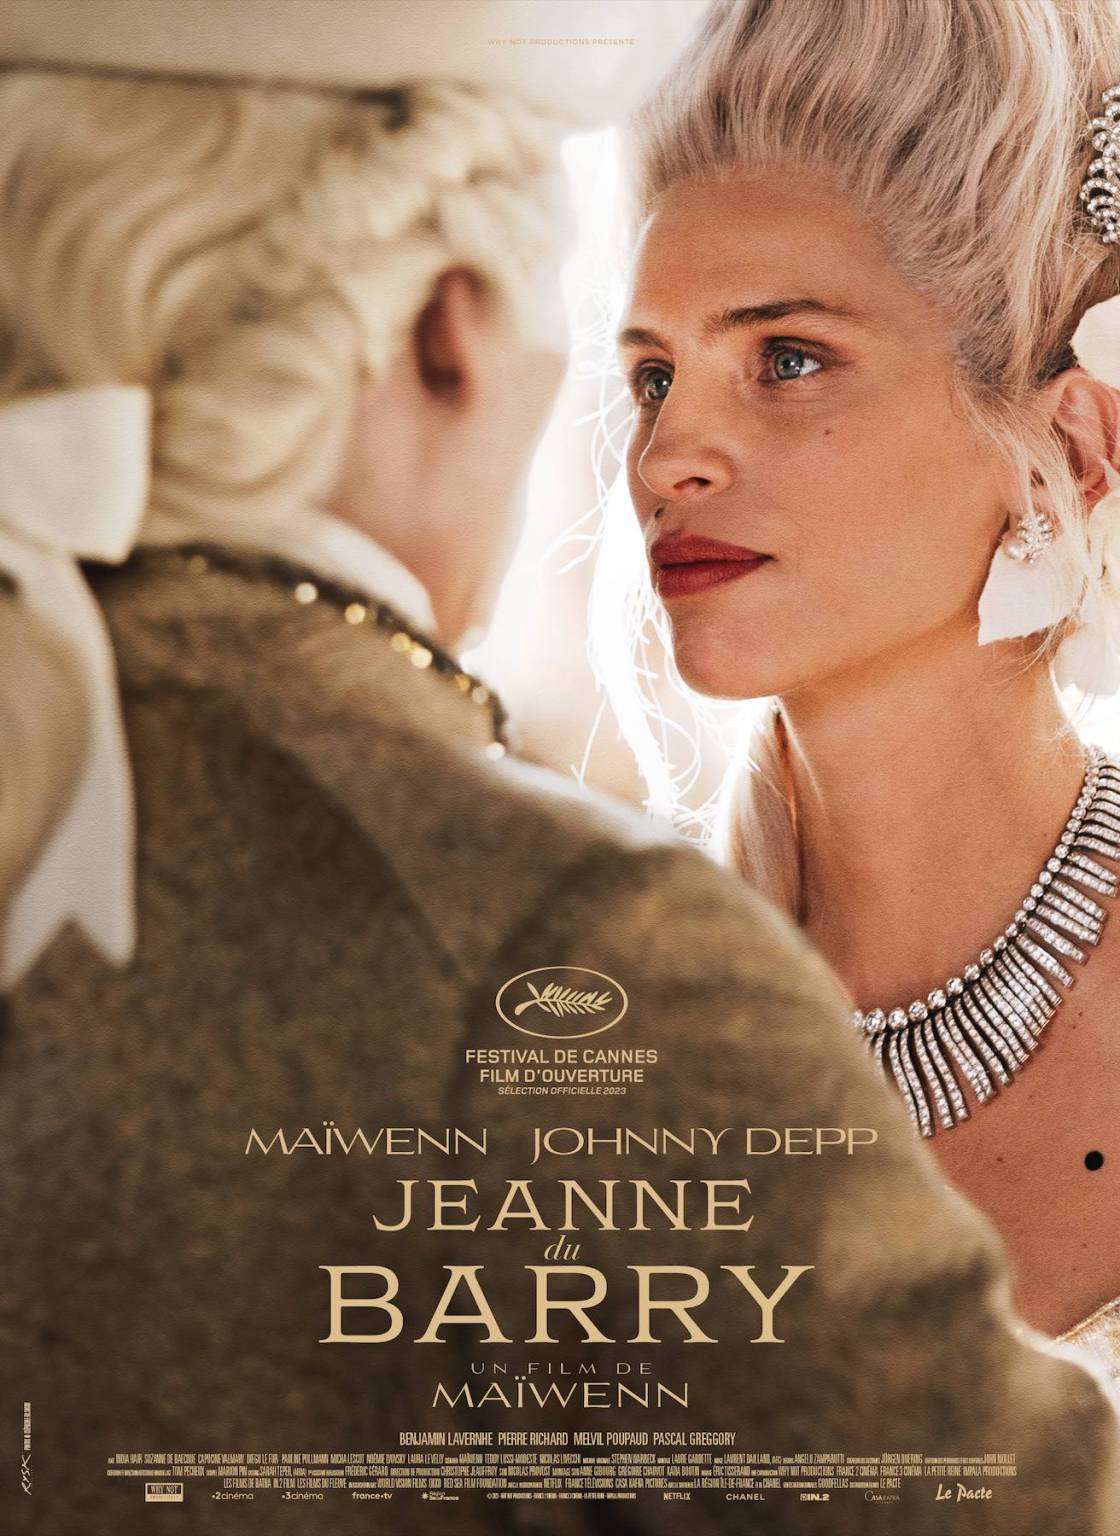 Poster for the film Jeanne du Barry, shown on the first day of the Cannes Film Festival.  Reproduction/Disclosure